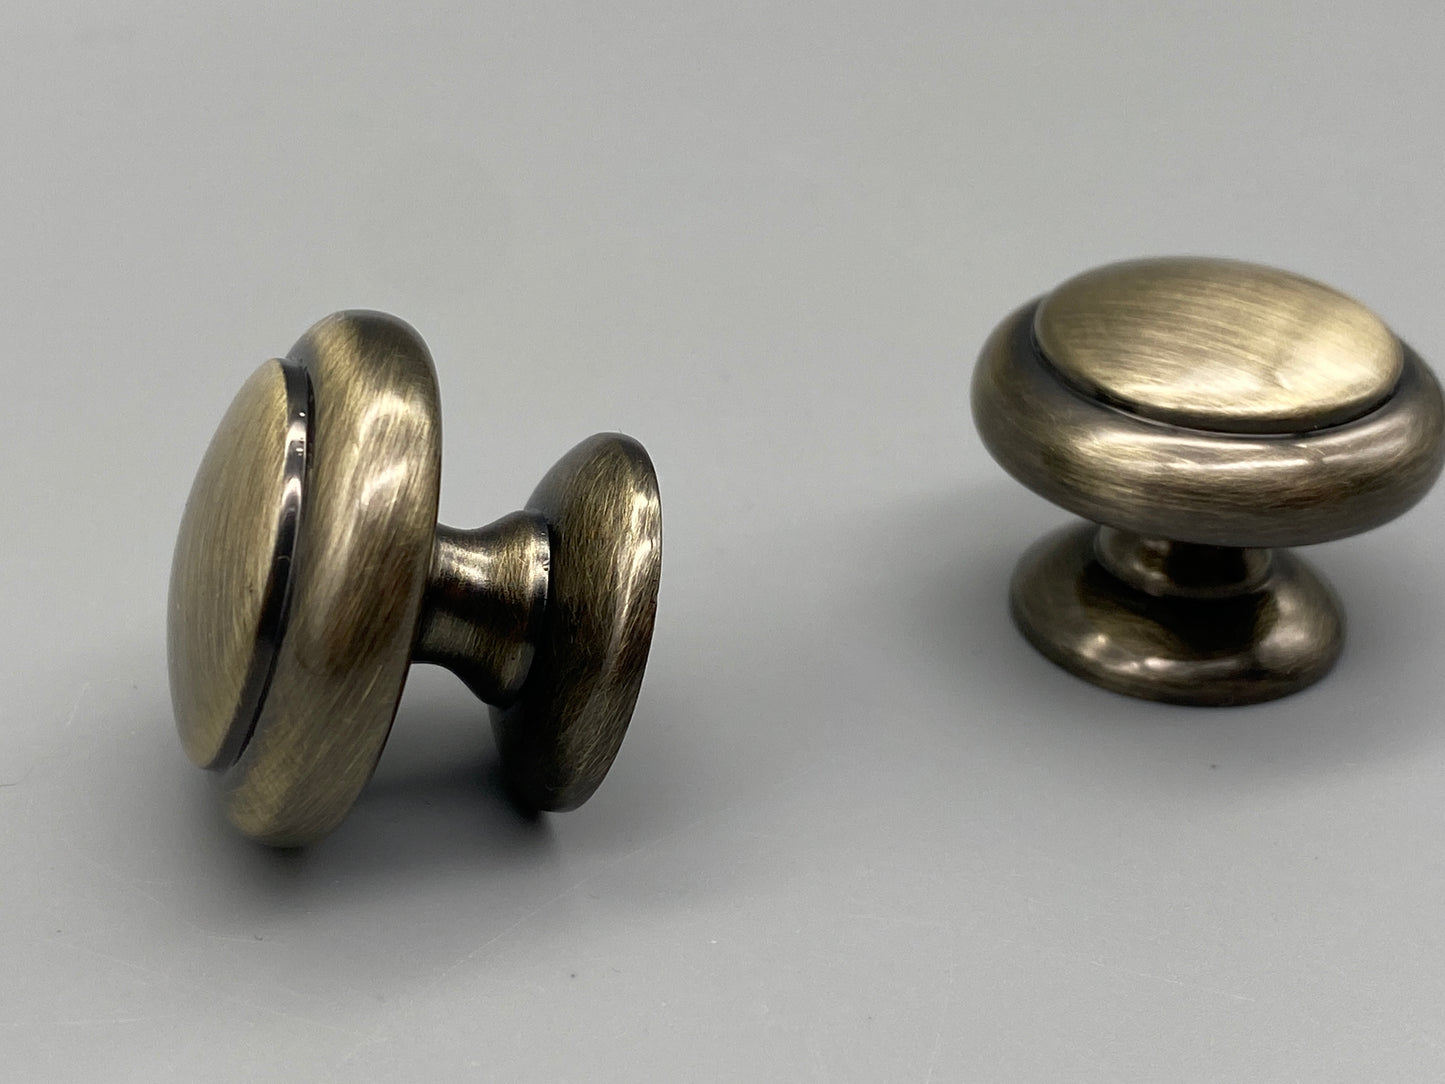 Antique Style Knobs - Antiqued Brass Finish 30mm Diameter - Pack of 1